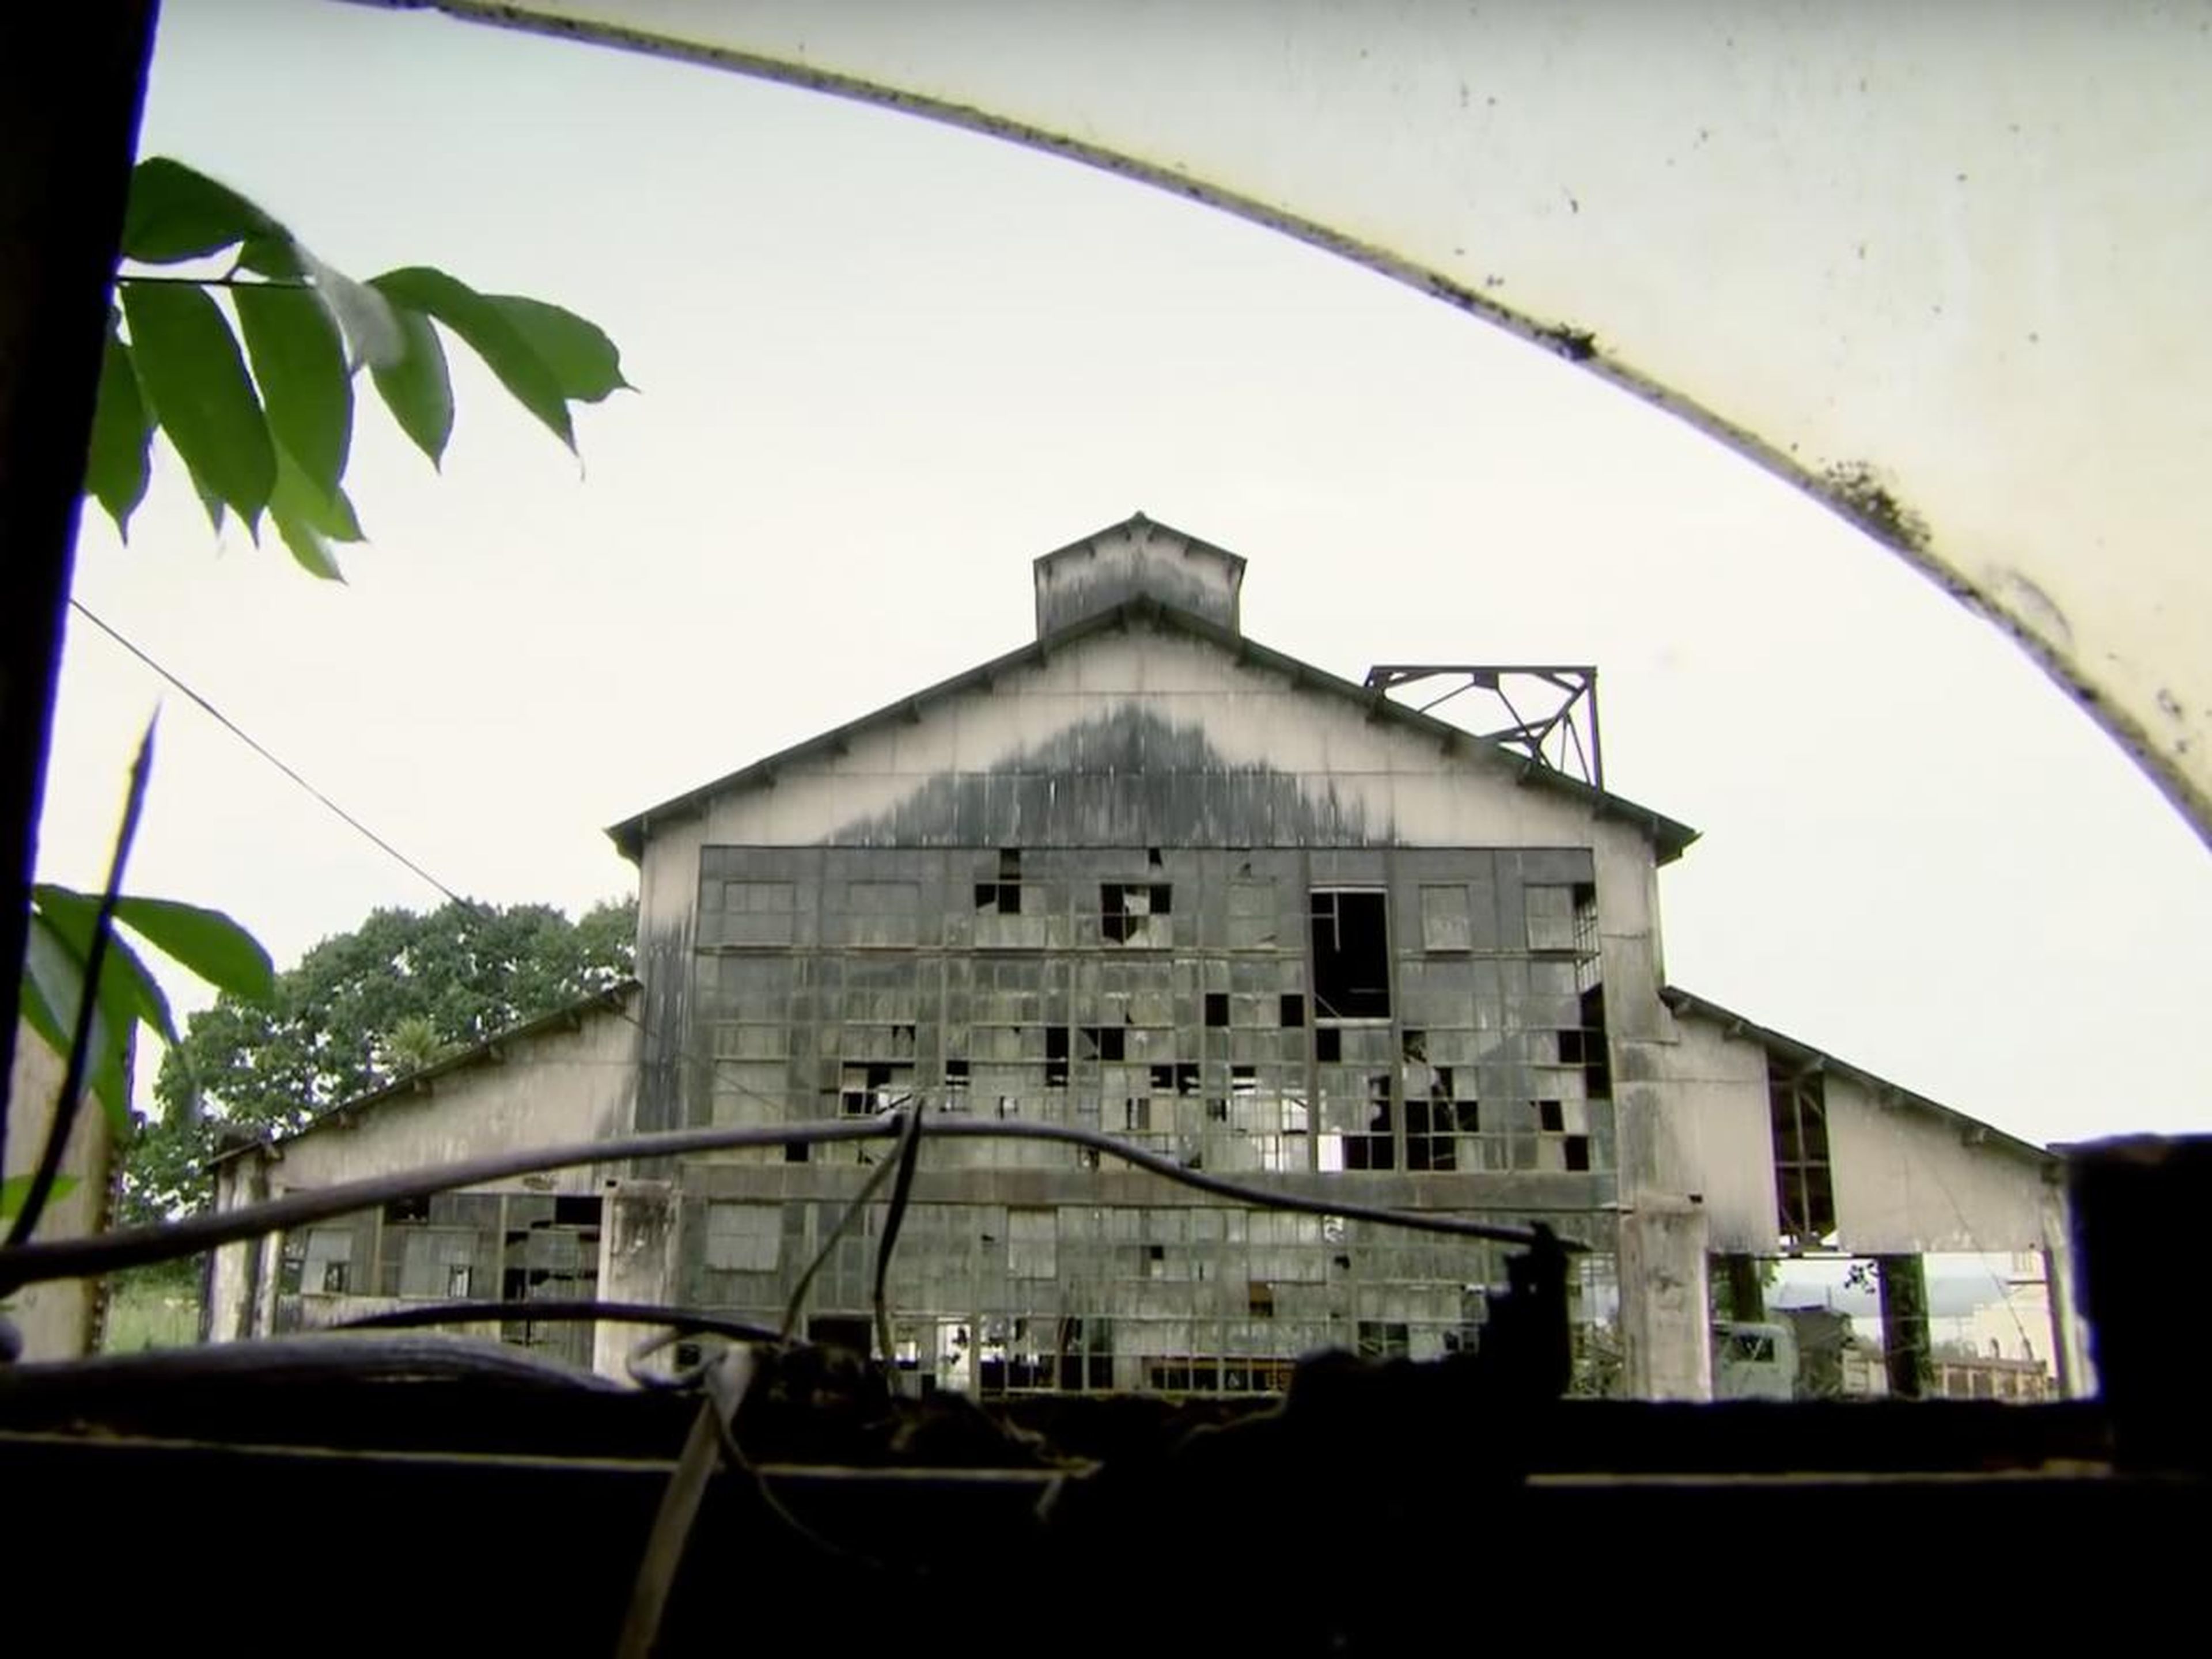 Now, 80 years later, a deteriorated factory building stands as a reminder of Fordlandia's failure.